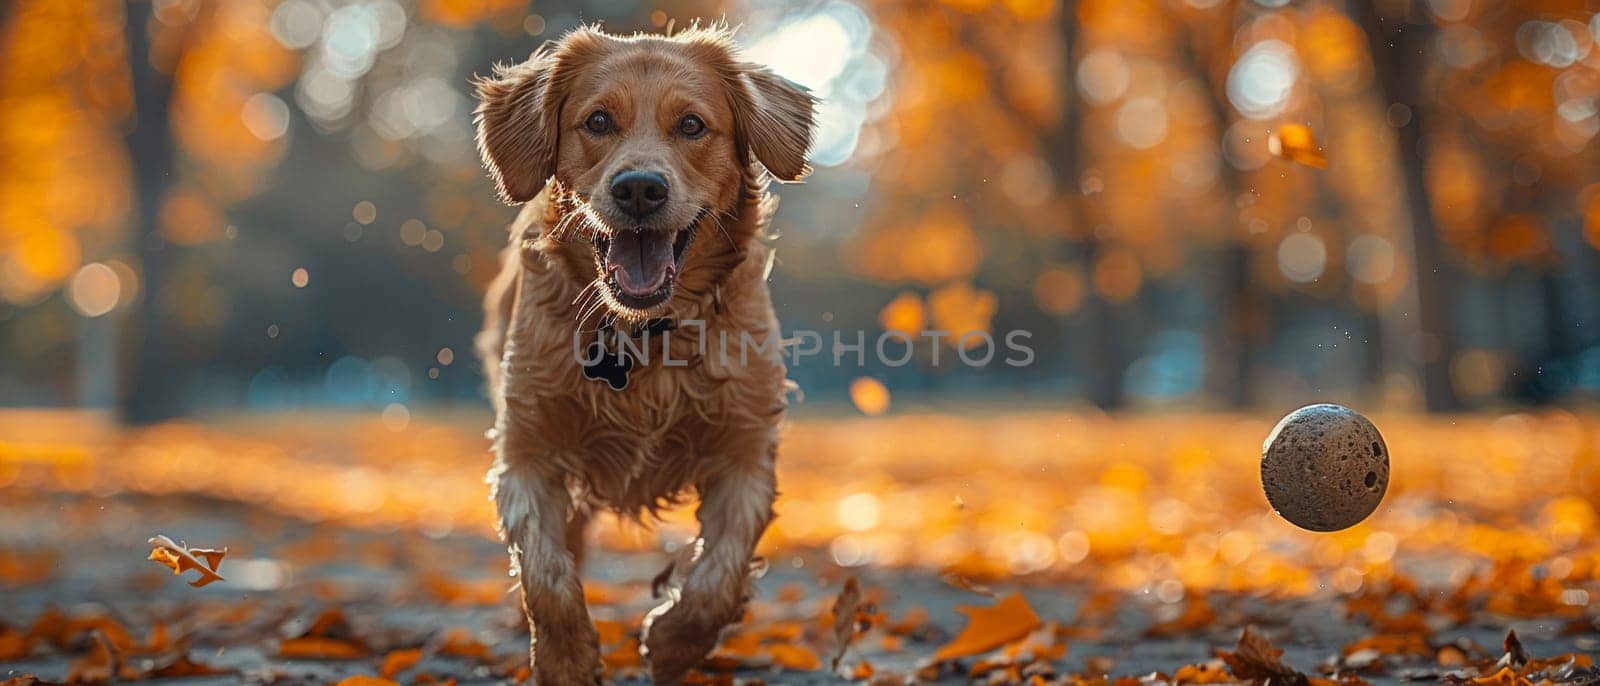 Dog fetching a ball in a park, showcasing playfulness and the bond between pets and owners.